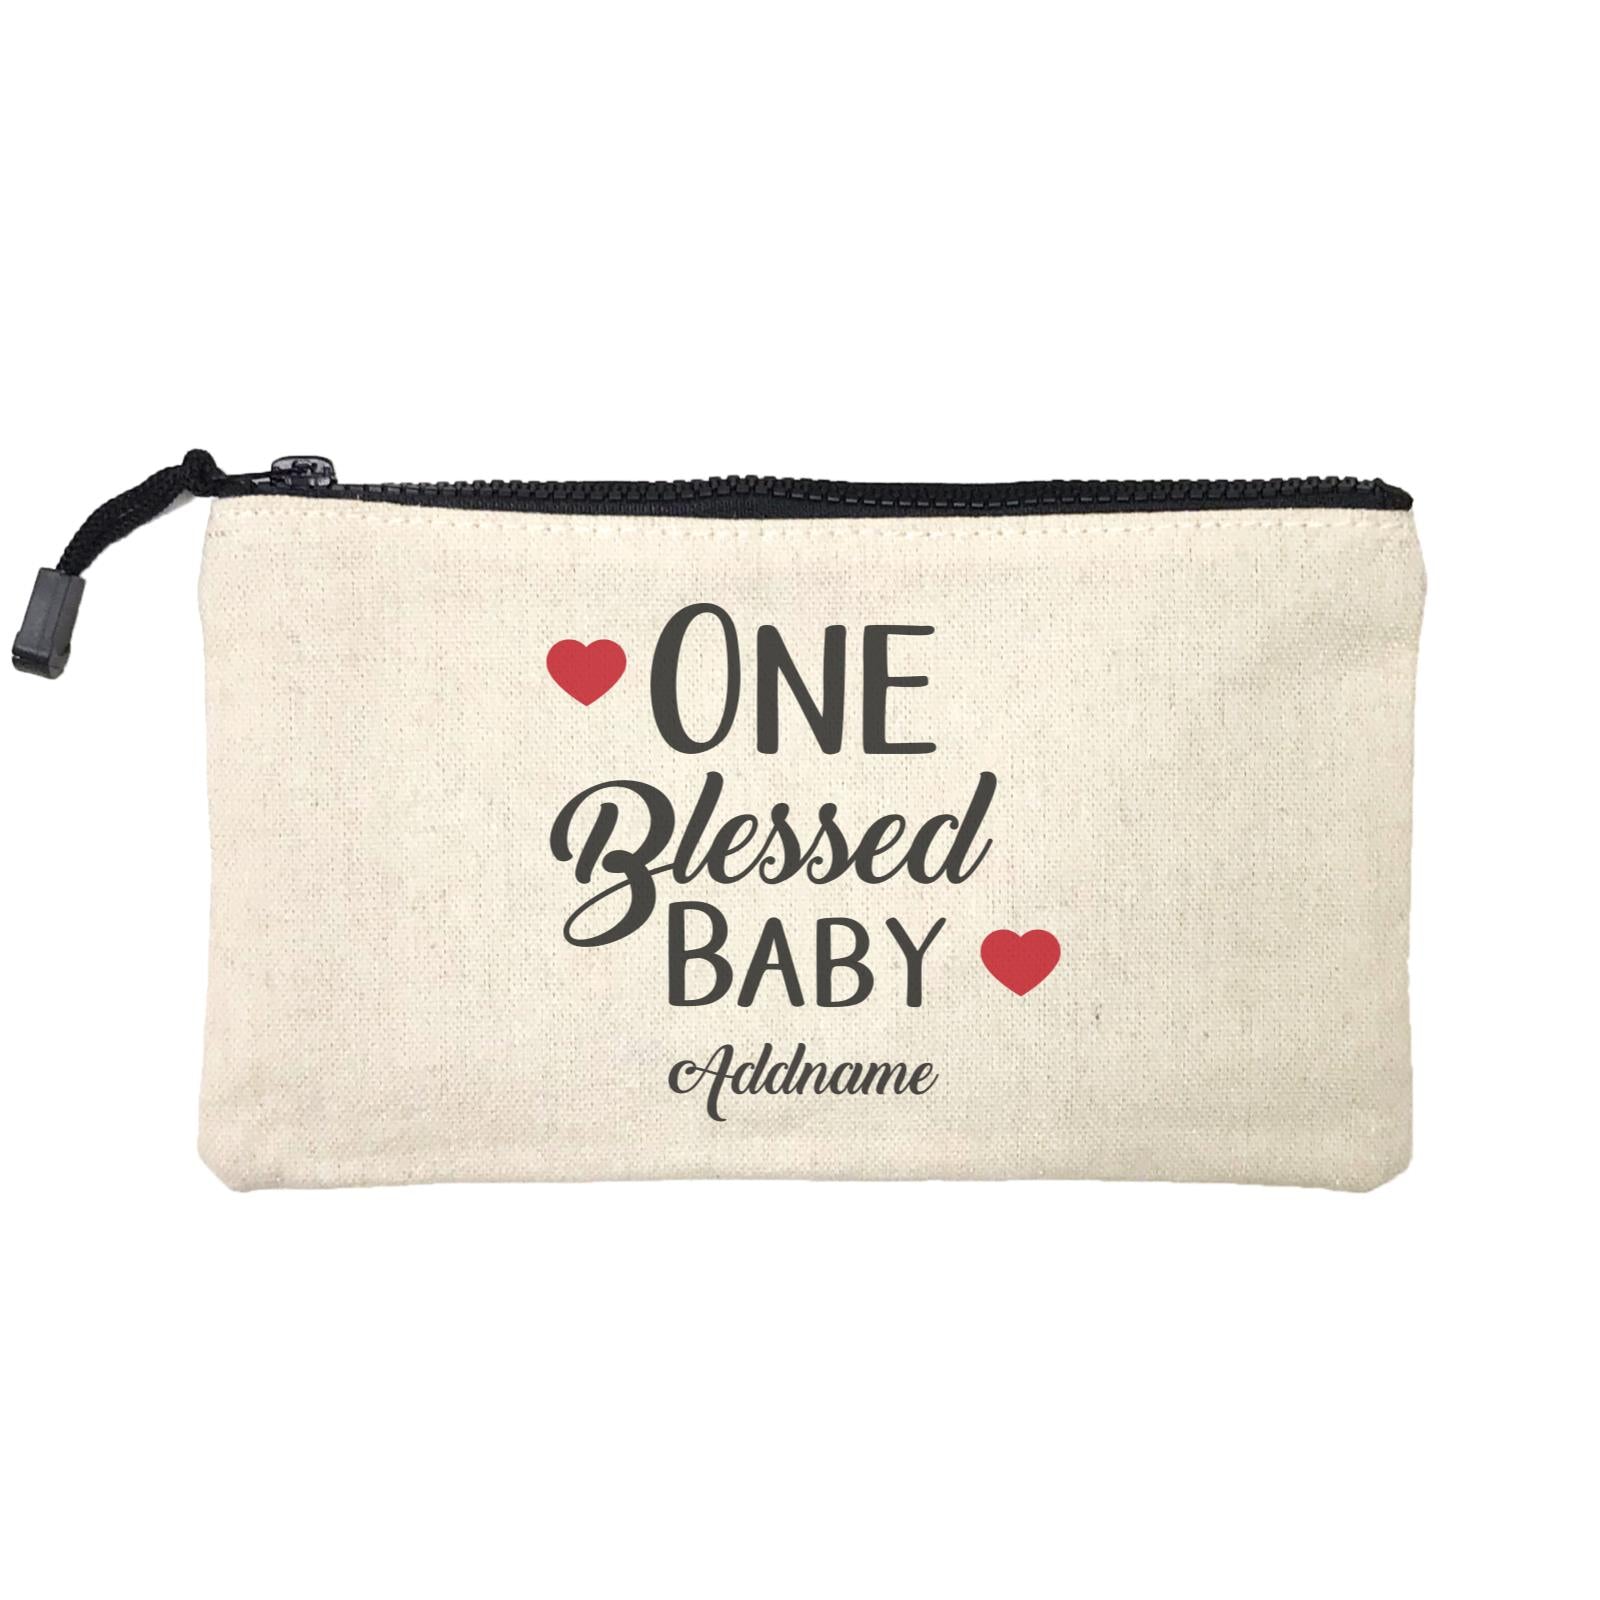 Christian Series One Blessed Baby Addname Mini Accessories Stationery Pouch